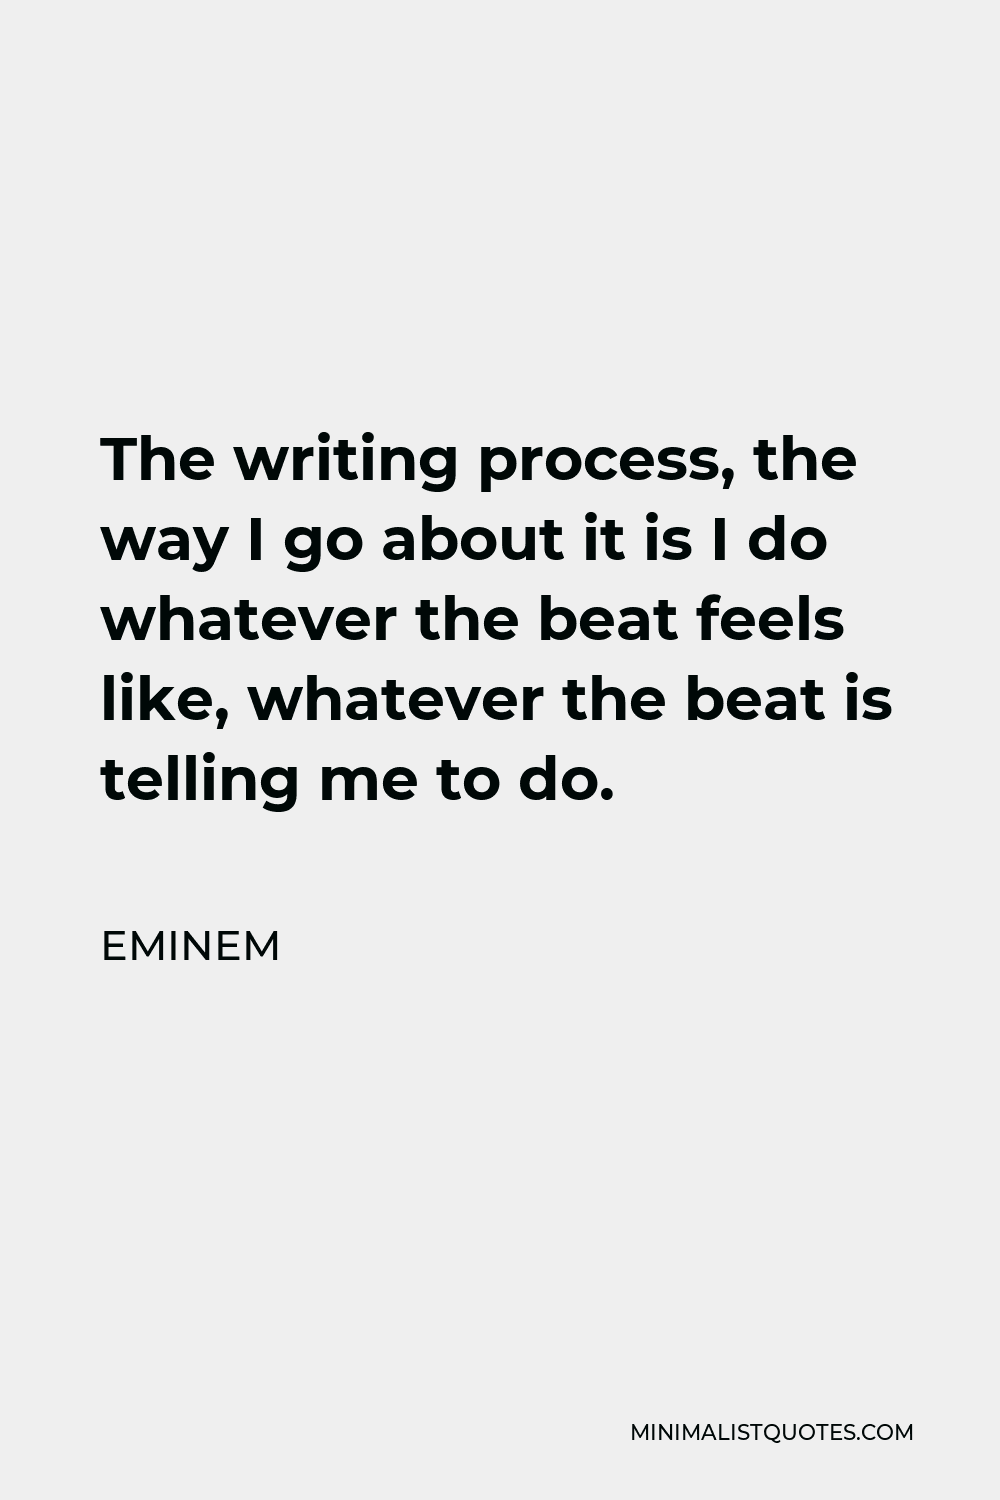 Eminem Quote - The writing process, the way I go about it is I do whatever the beat feels like, whatever the beat is telling me to do.